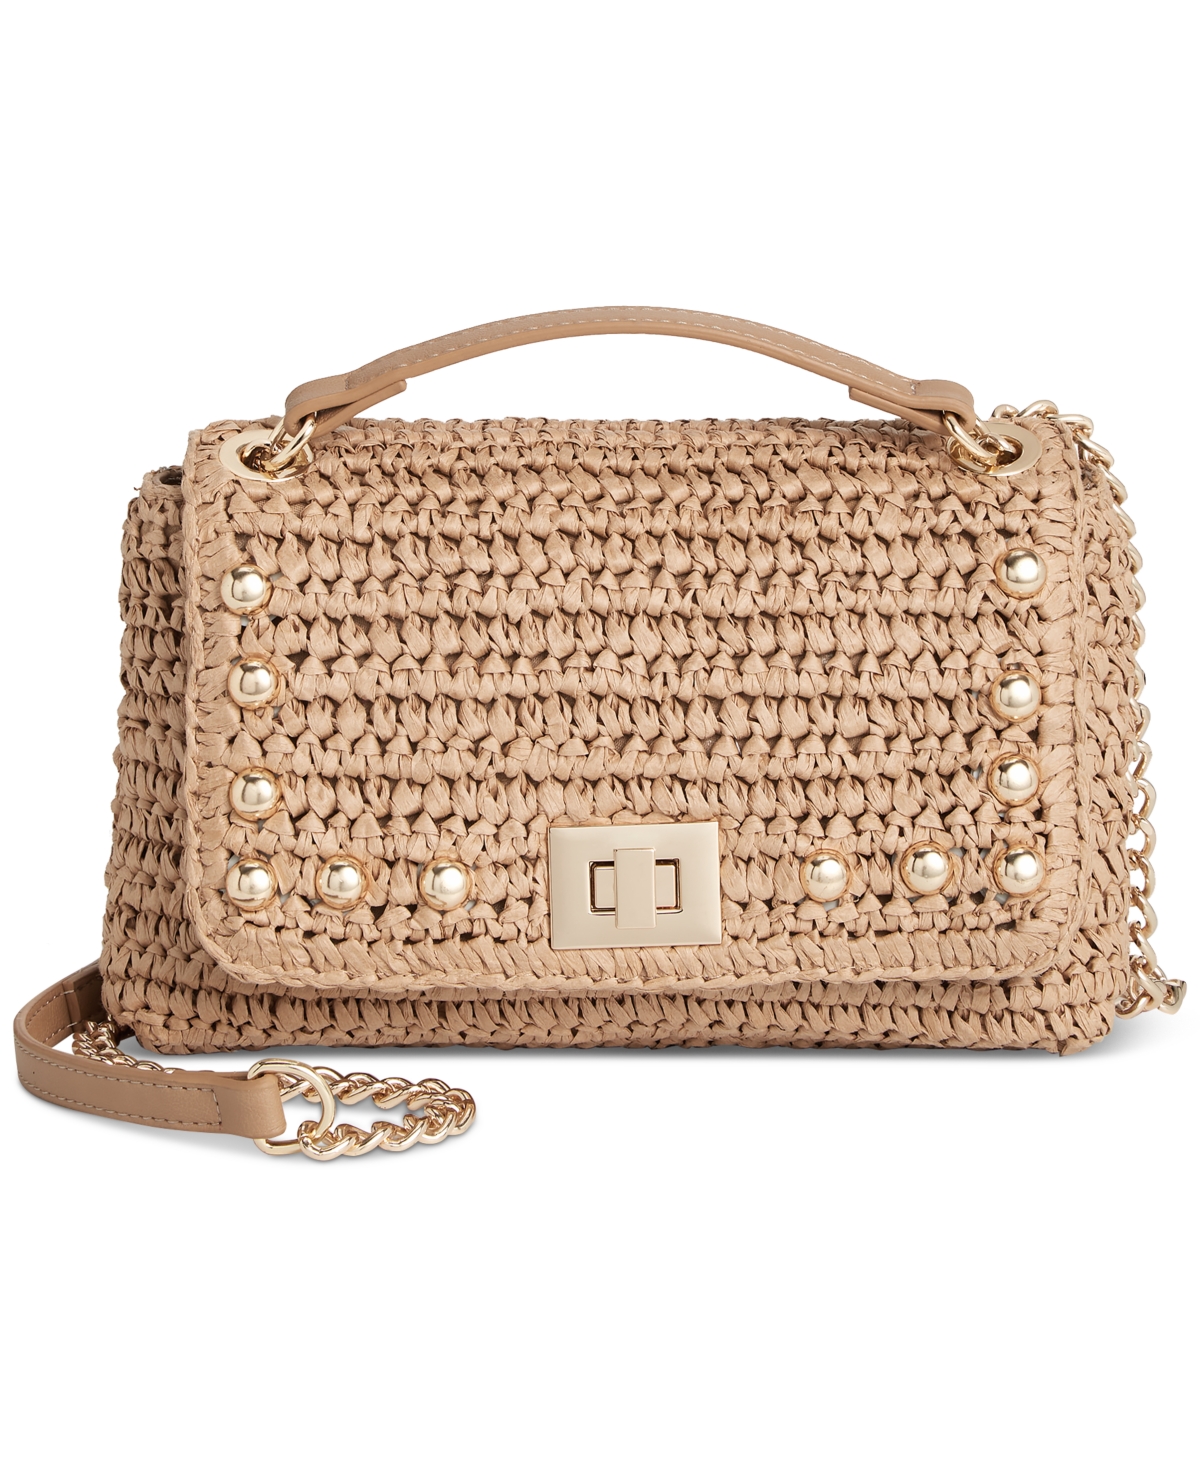 Ajae Crochet Small Straw Shoulder Bag, Created for Macy's - Straw/natural